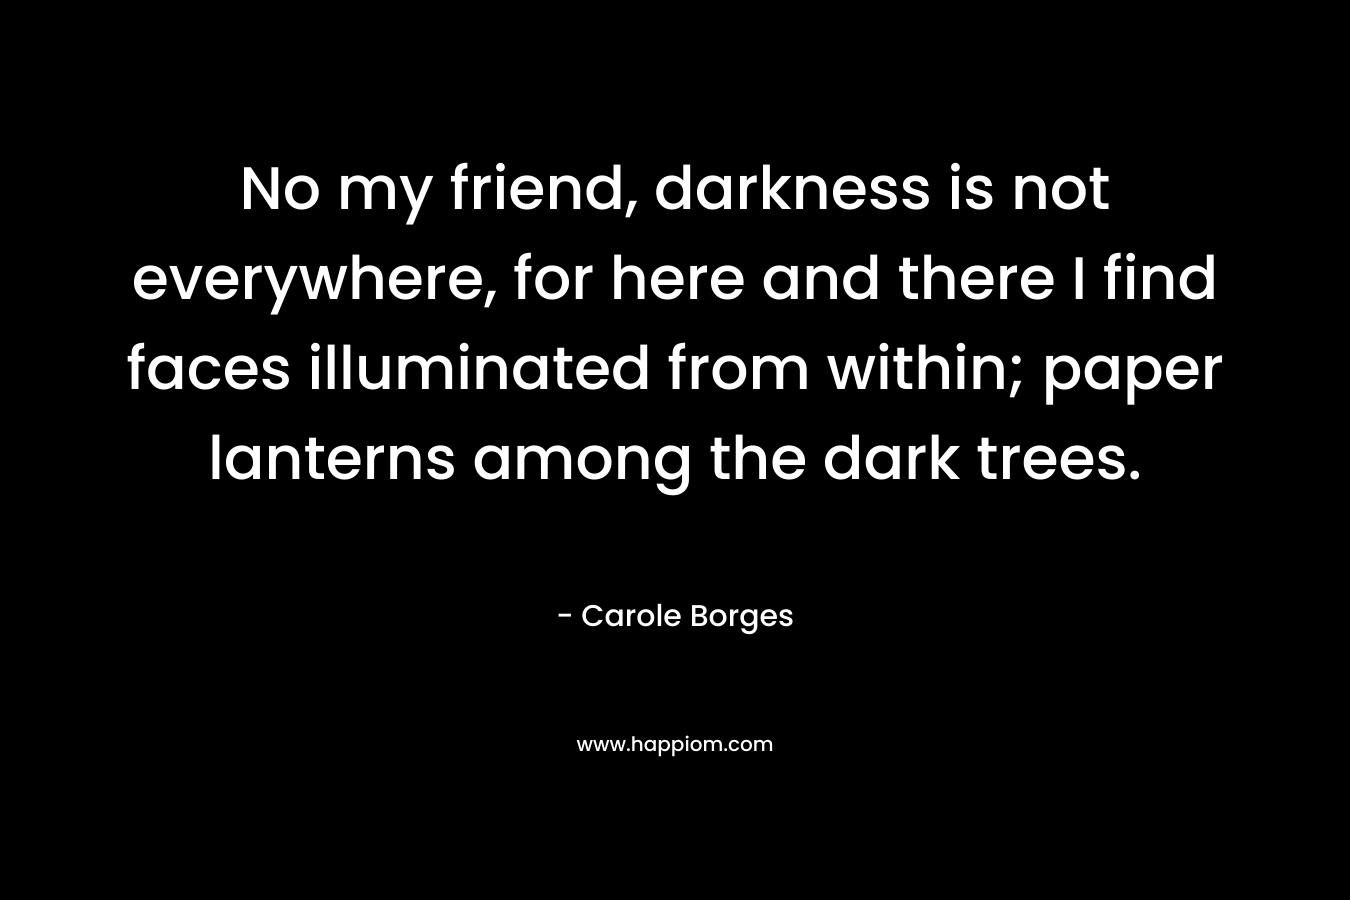 No my friend, darkness is not everywhere, for here and there I find faces illuminated from within; paper lanterns among the dark trees. – Carole Borges